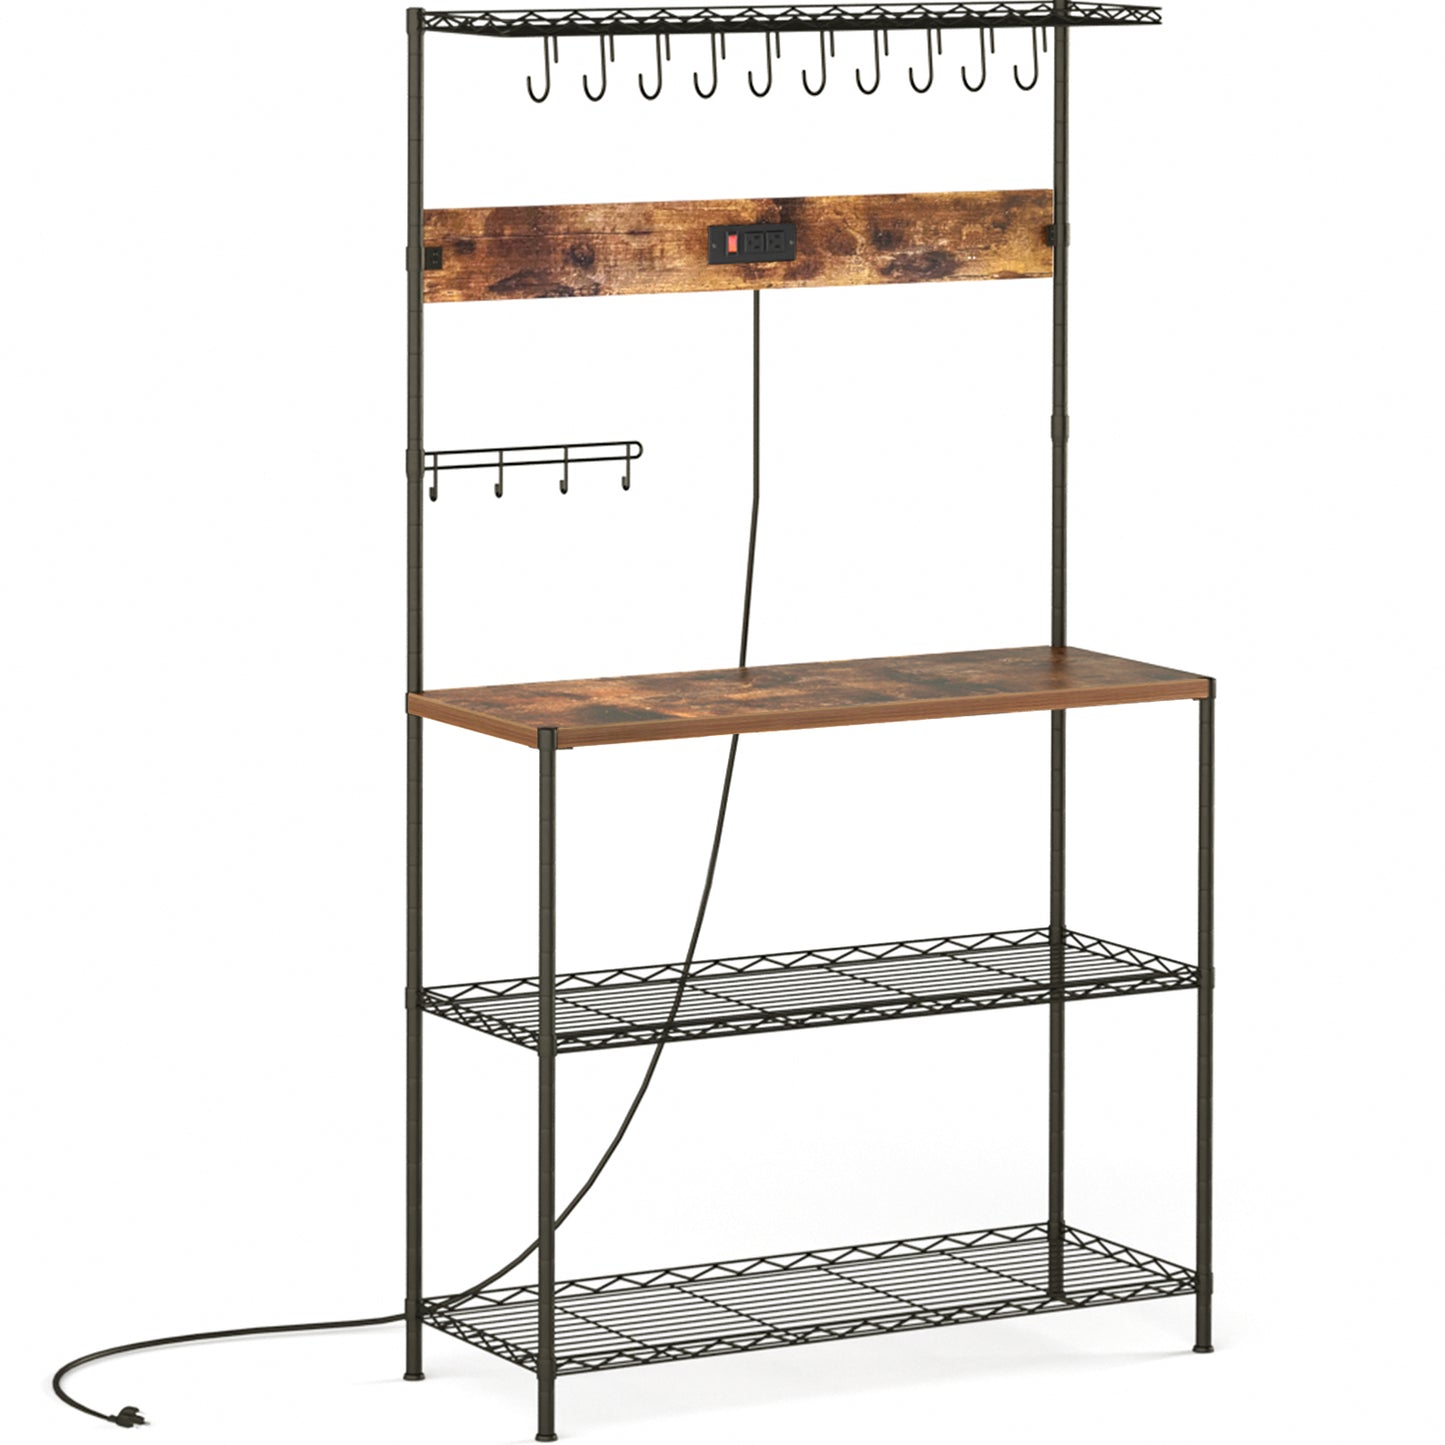 SUPERJARE Bakers Rack with Power Outlets, Height Adjustable, 4-tier, 10 S-shaped Hooks, 360° Hanging Strip, Coffee Bar Station - Rustic Brown 80924ZC